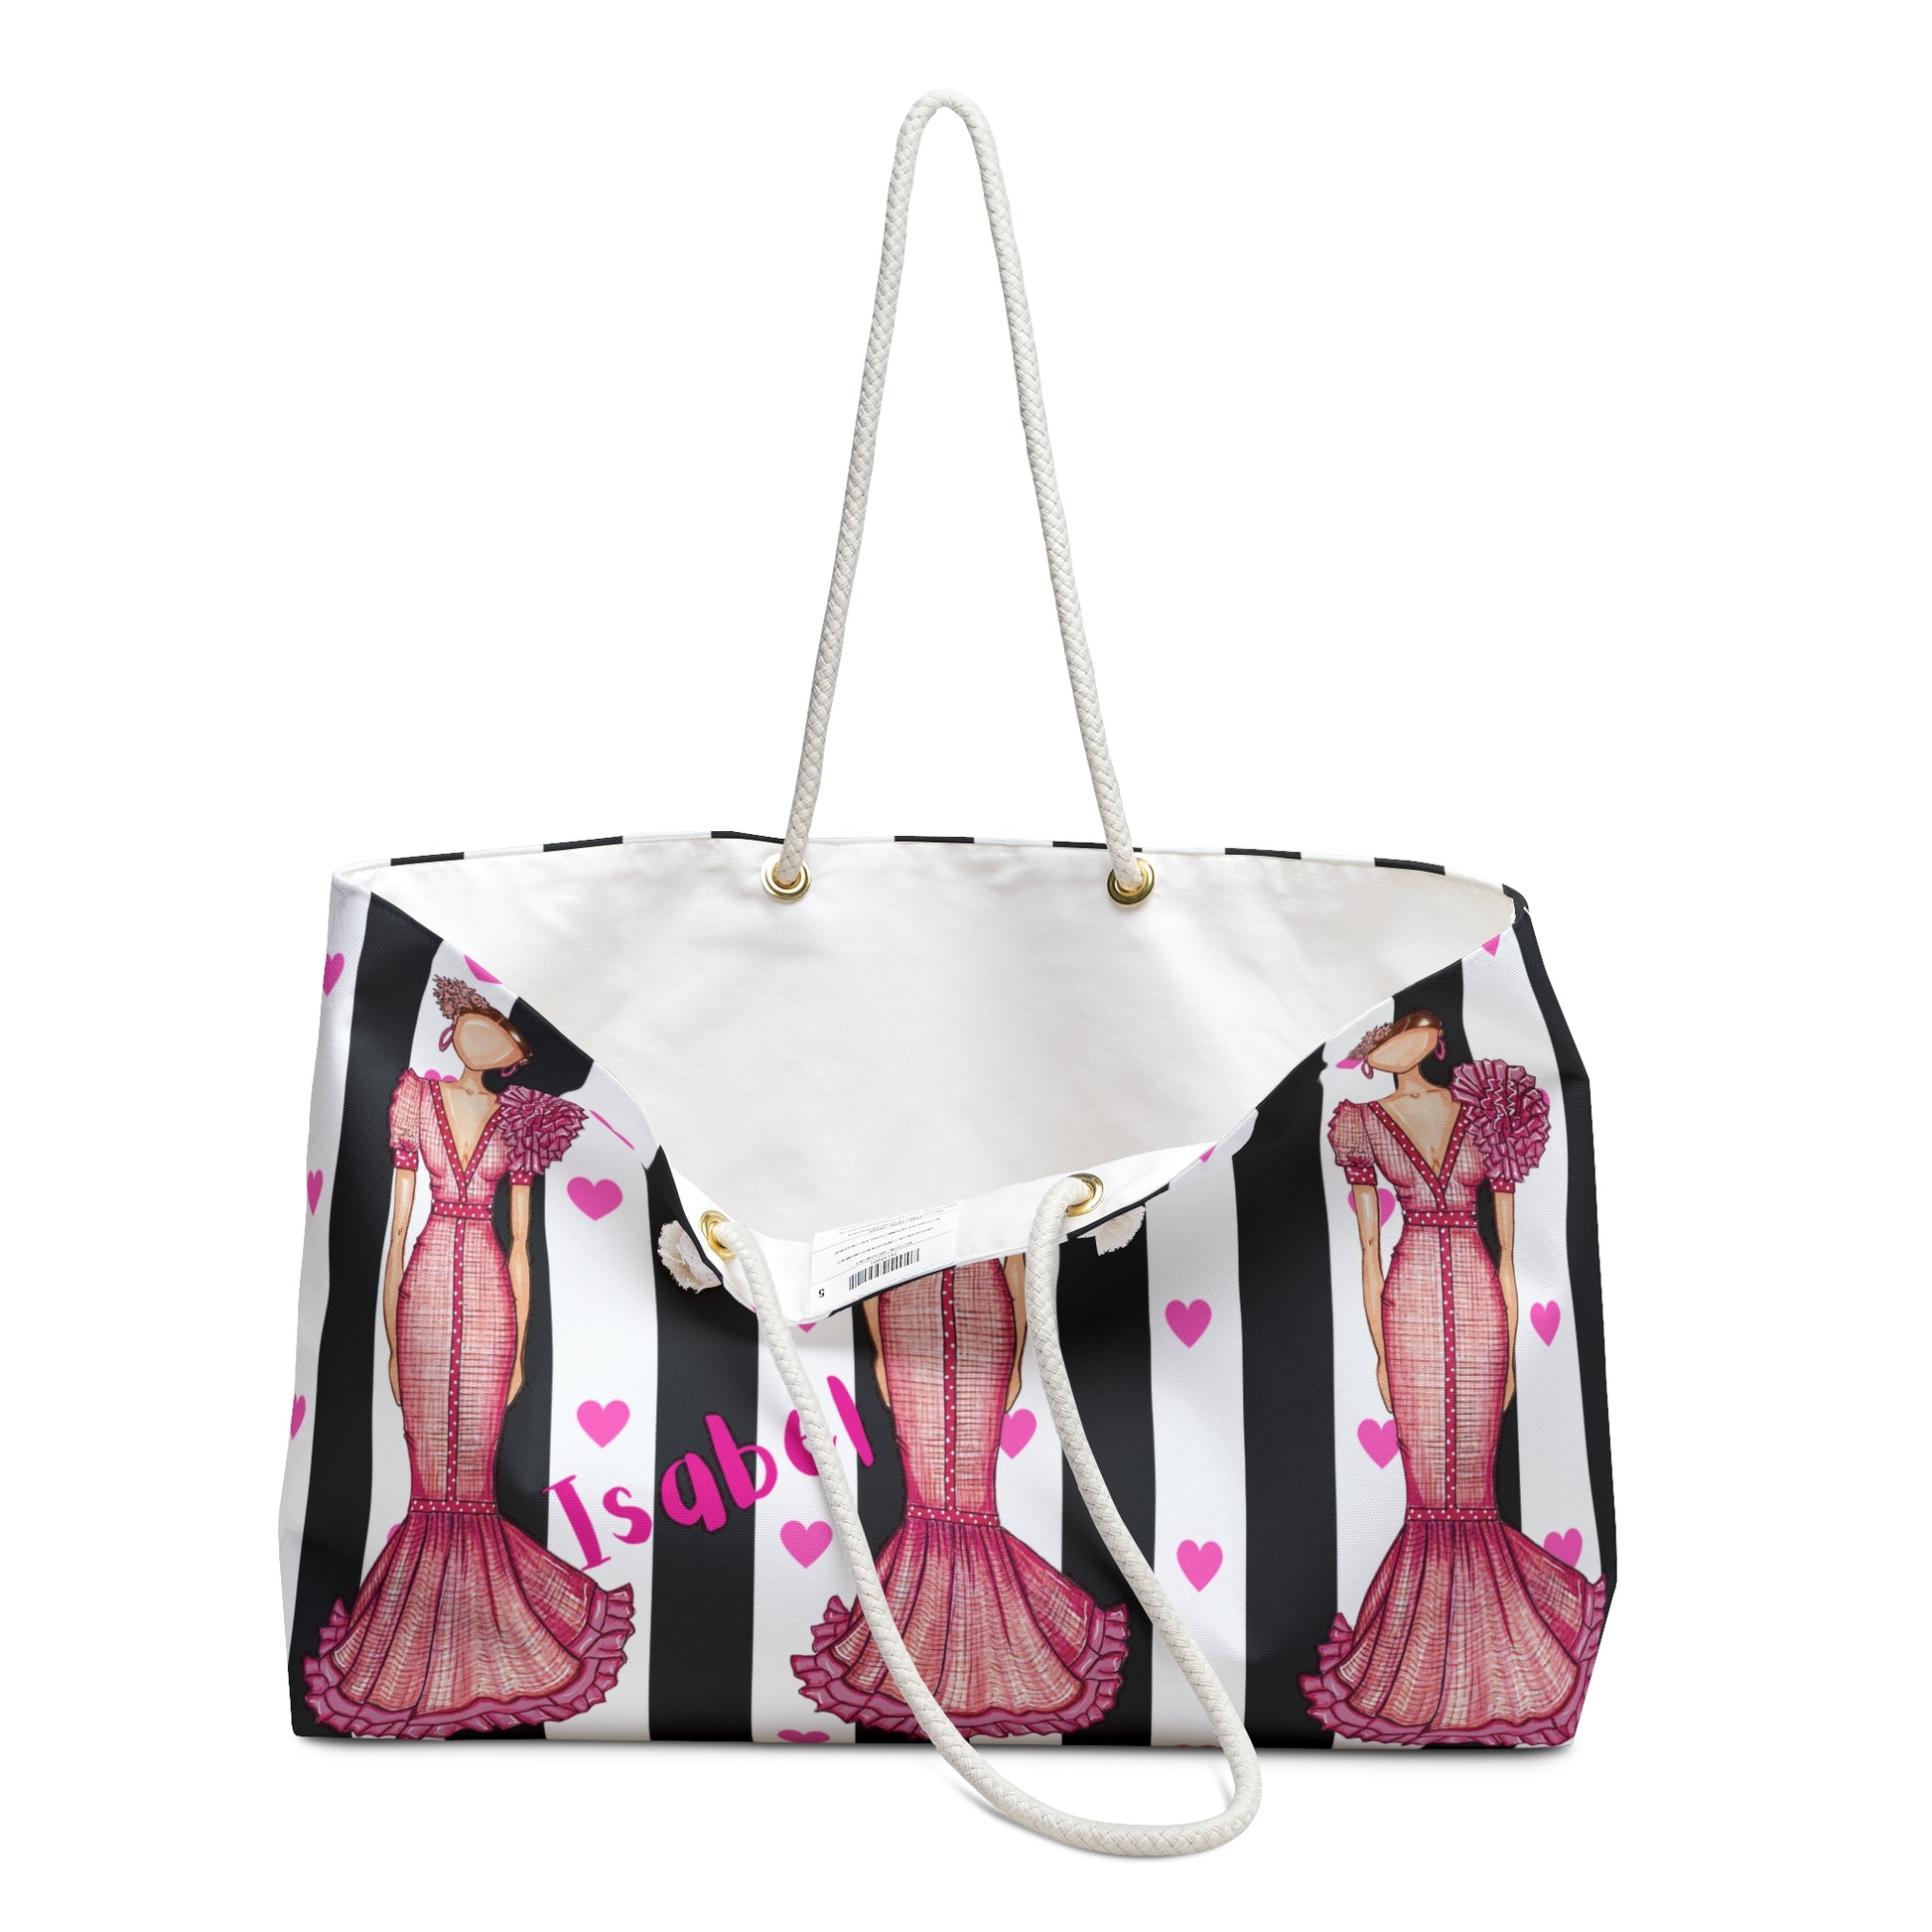 a handbag with a picture of a woman on it